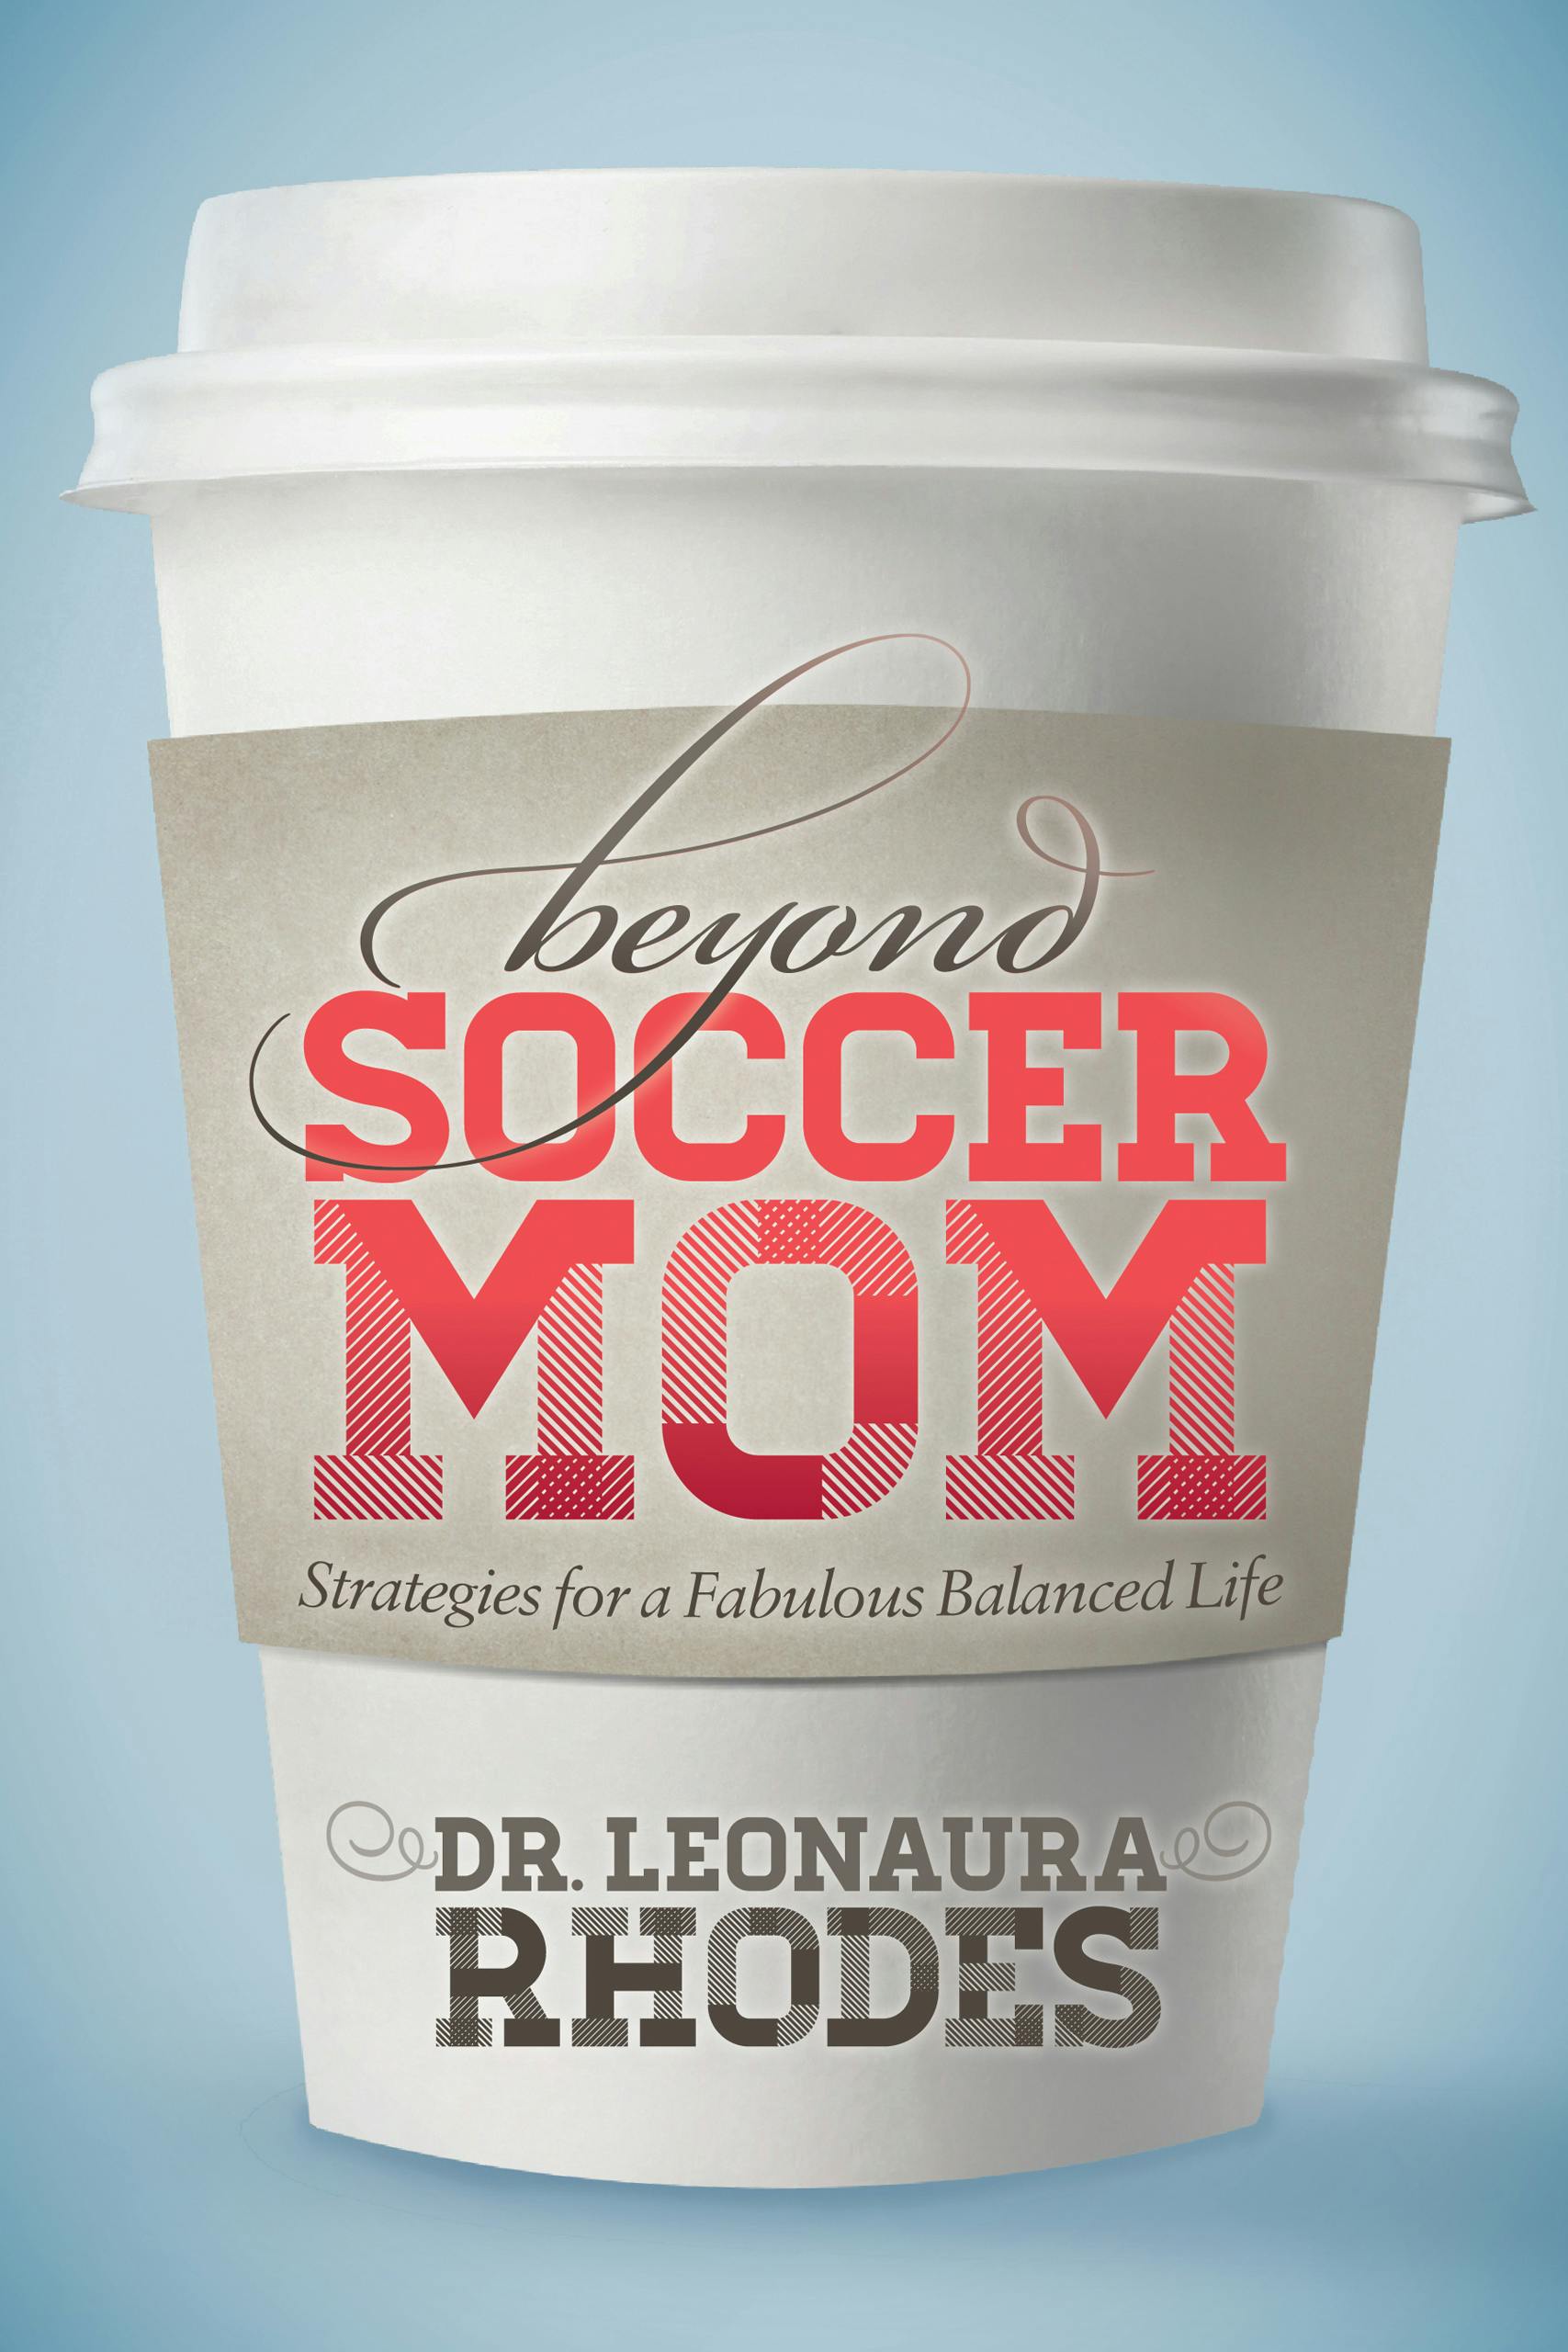 Book signing "Beyond Soccer Mom: strategies for a fabulous balanced life" at Barnes and Noble in Mohegan Lake